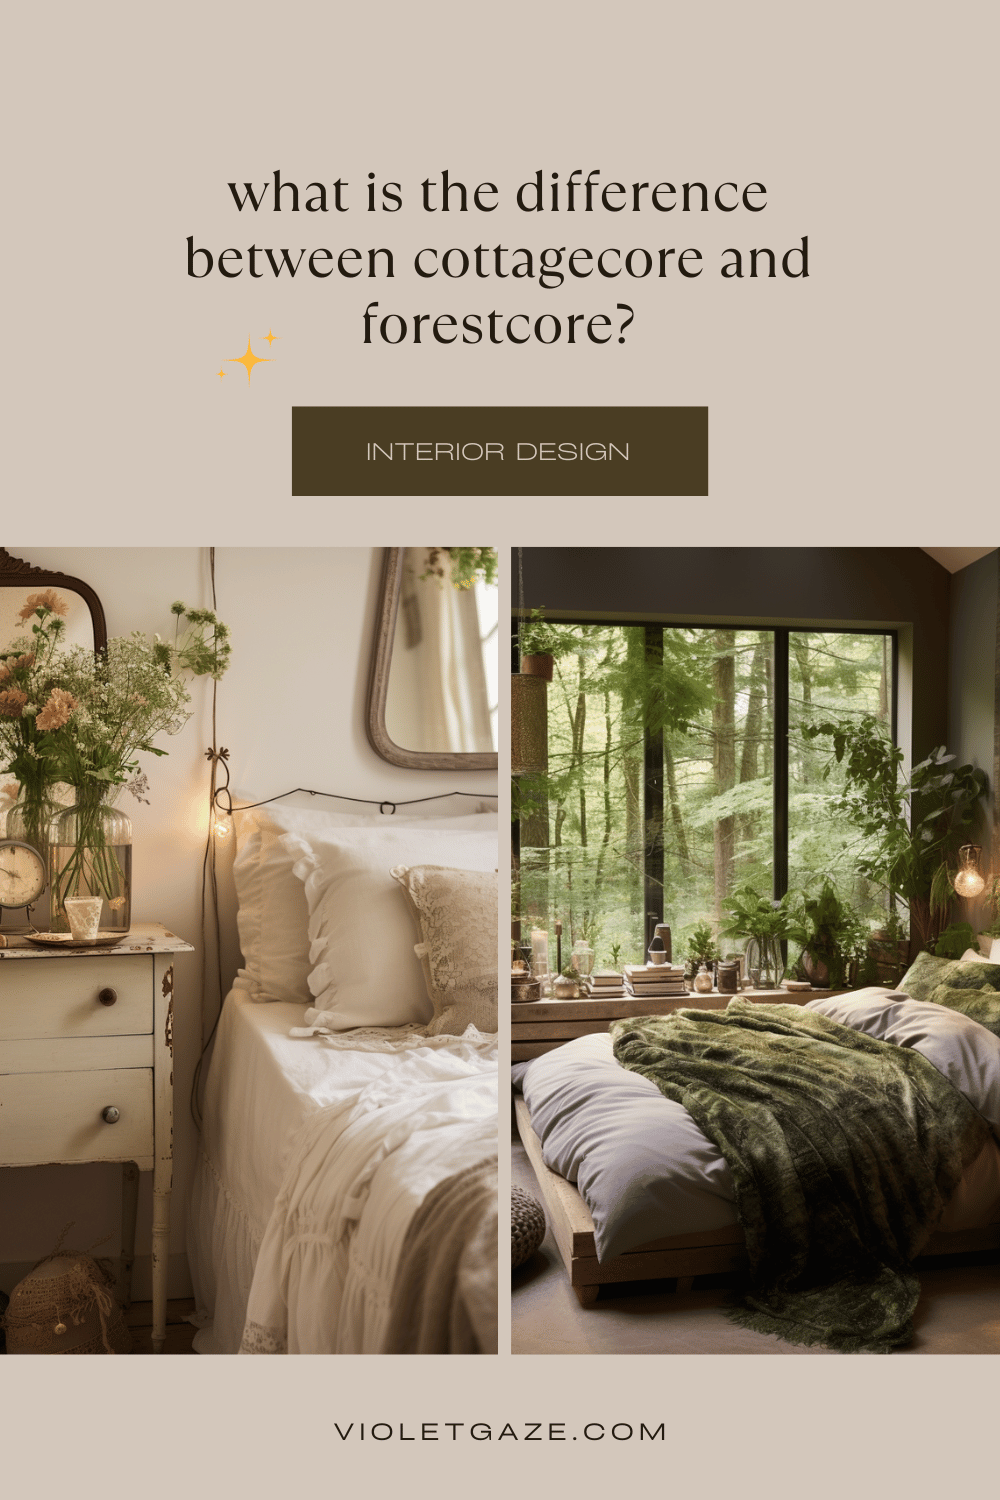 what is the difference between cottagecore and forestcore interior design?